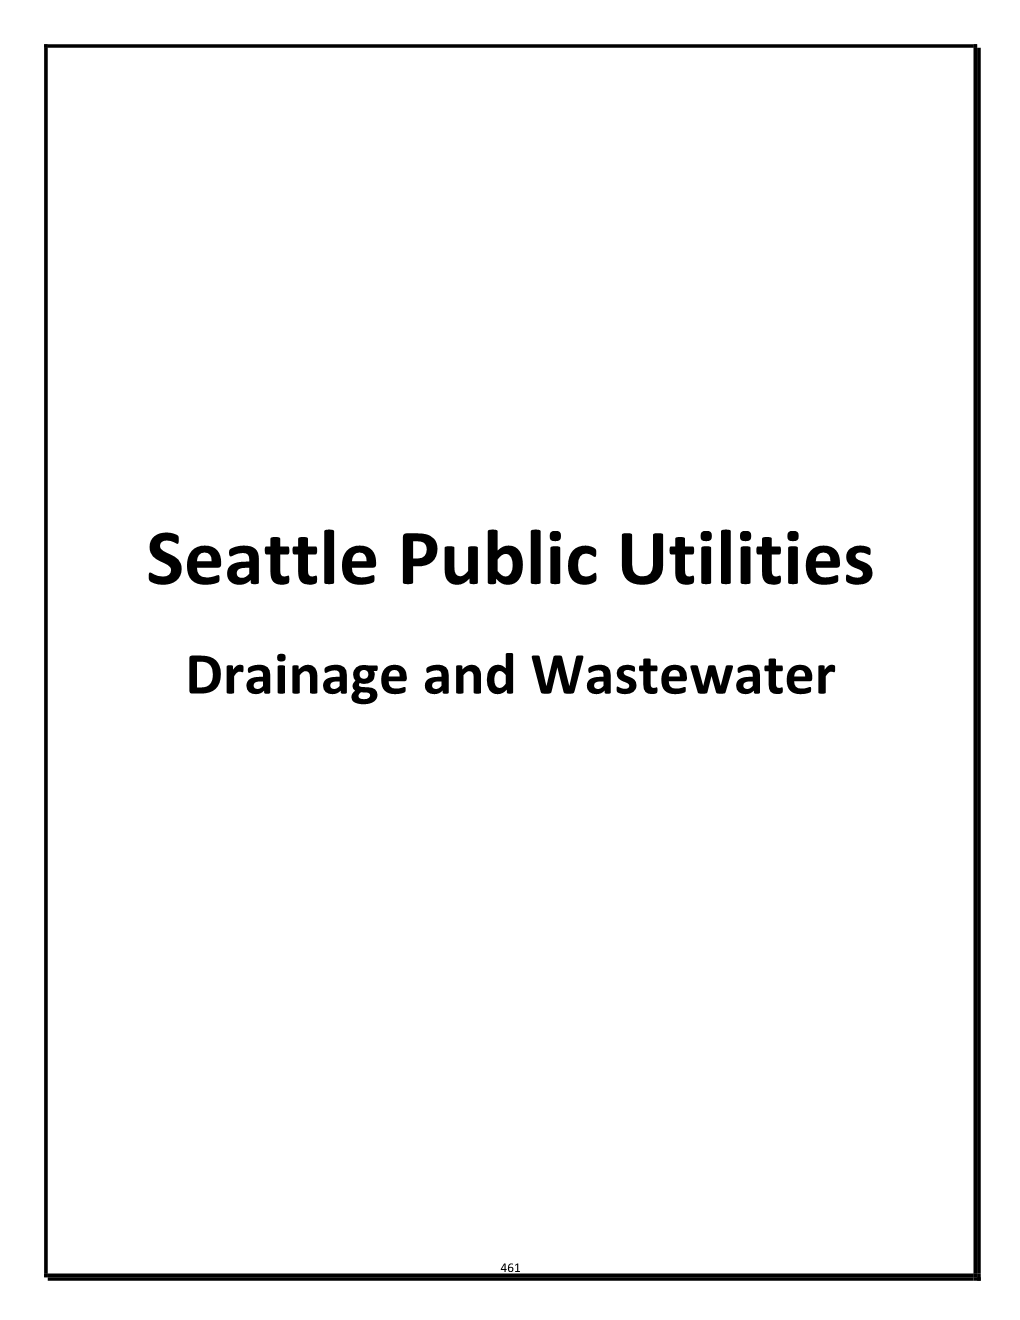 Seattle Public Utilities Drainage and Wastewater